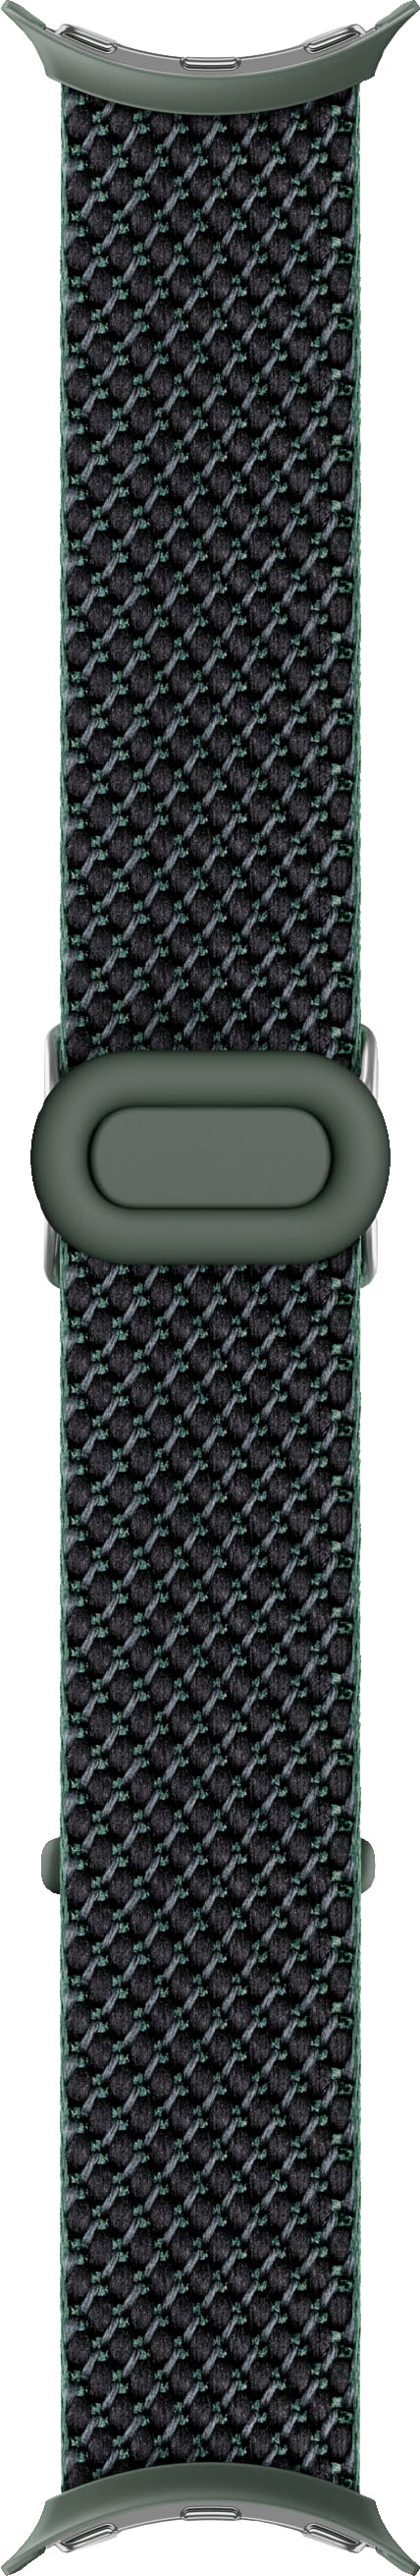 Google Buy One - Band, Size Best GA03270-WW Woven Ivy